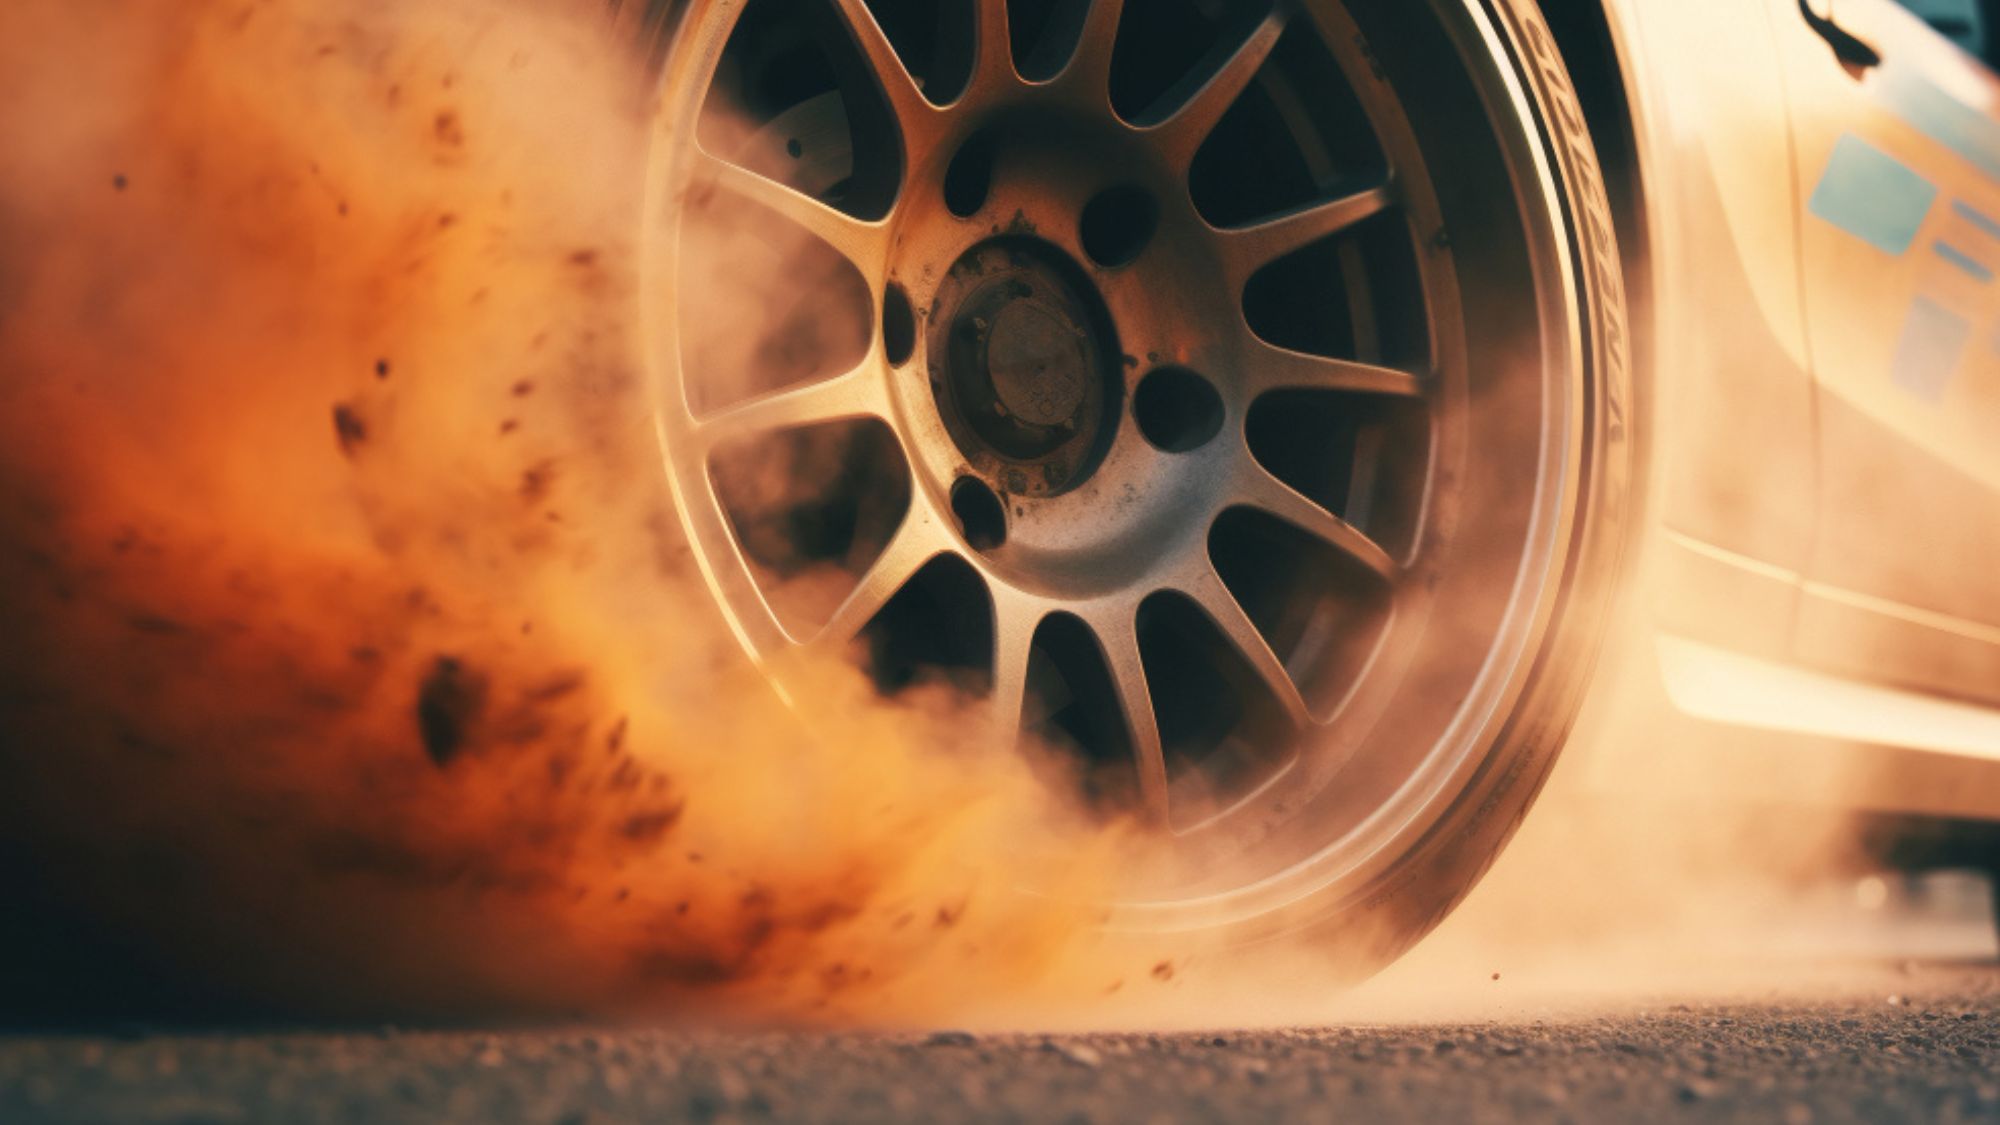 A car tire emitting smoke due to car exhaust backpressure